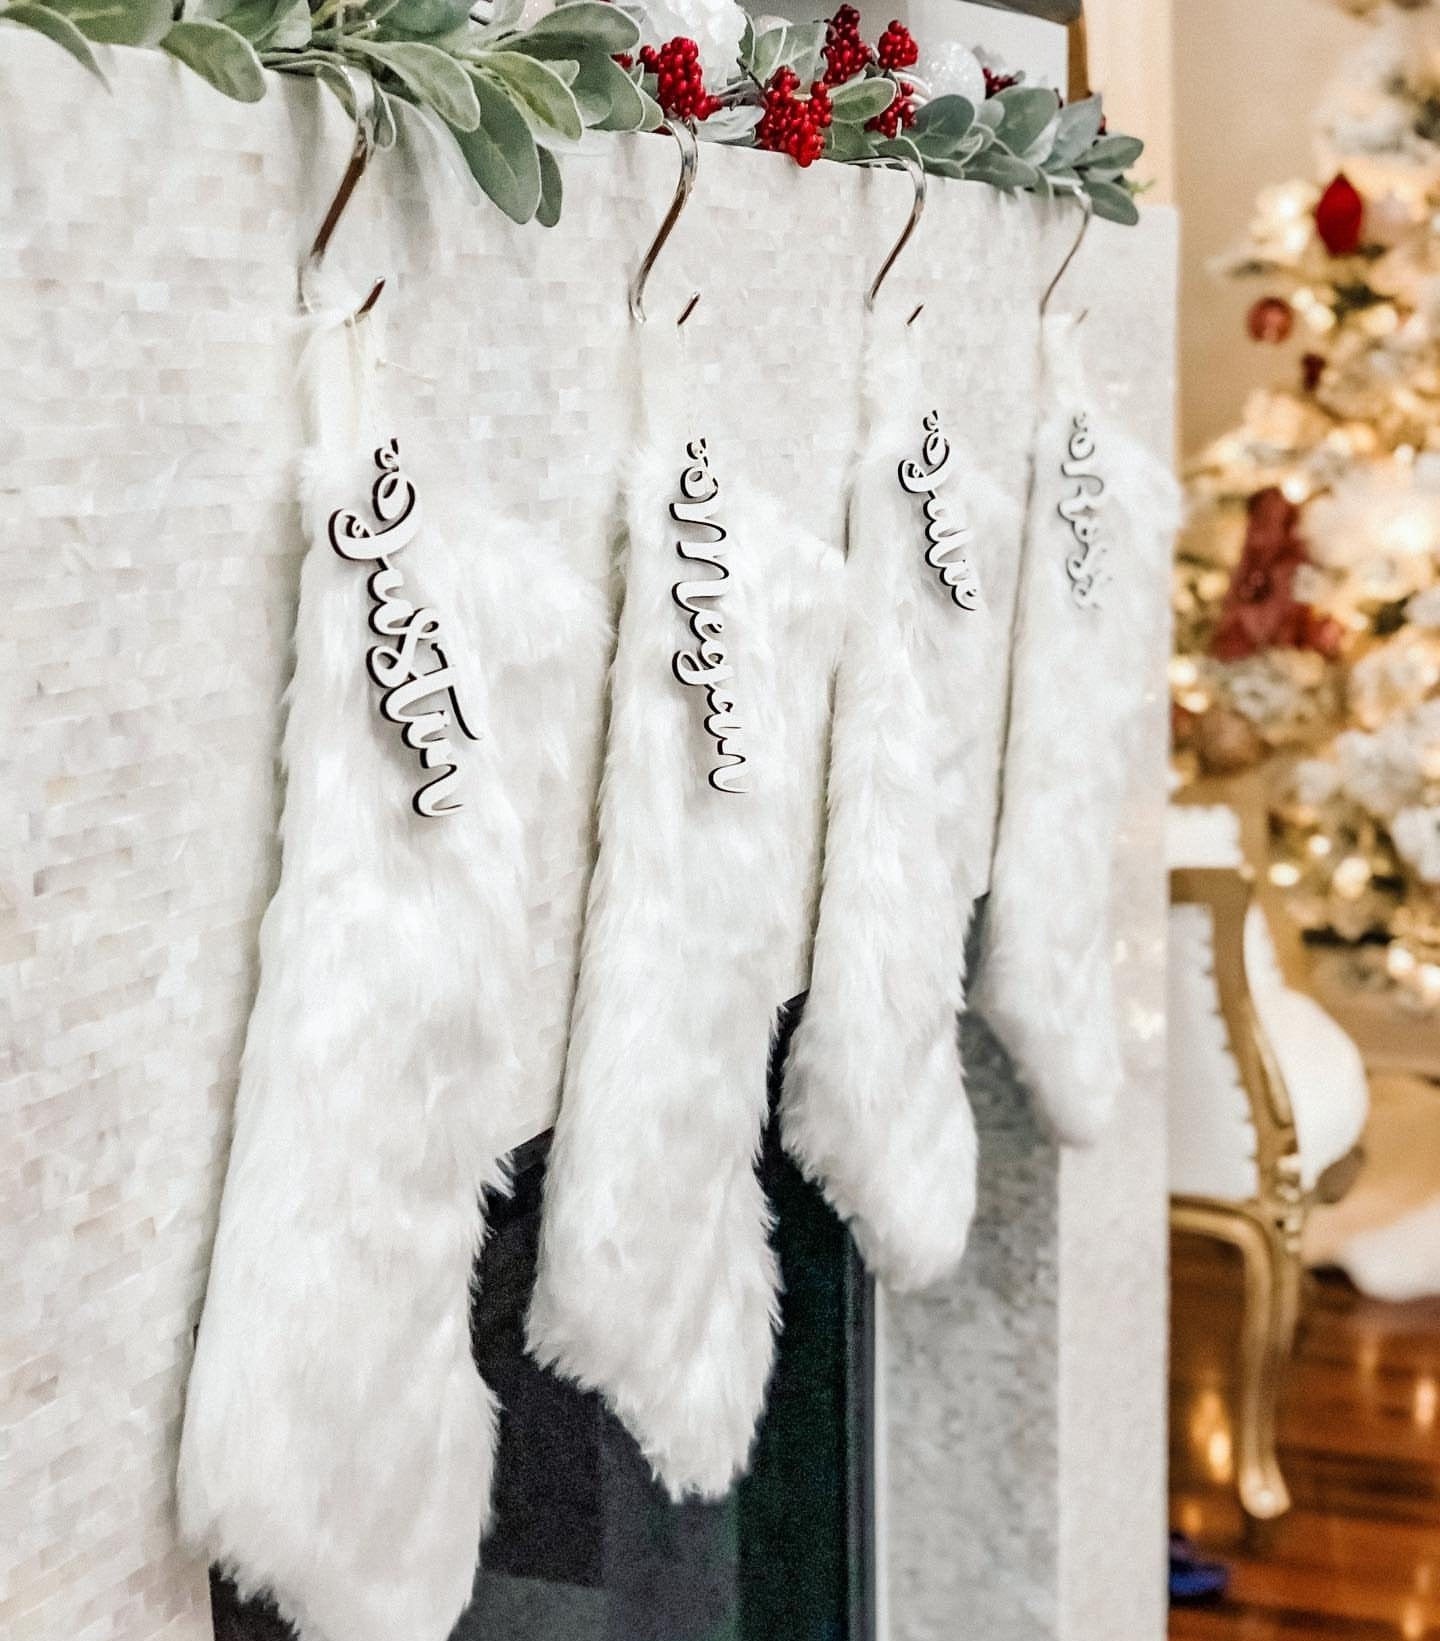 Christmas Stocking Name Tags Personalized Stocking Name Tags Personalized Christmas Decor Stocking Tags Custom Name Tags for Stockings 